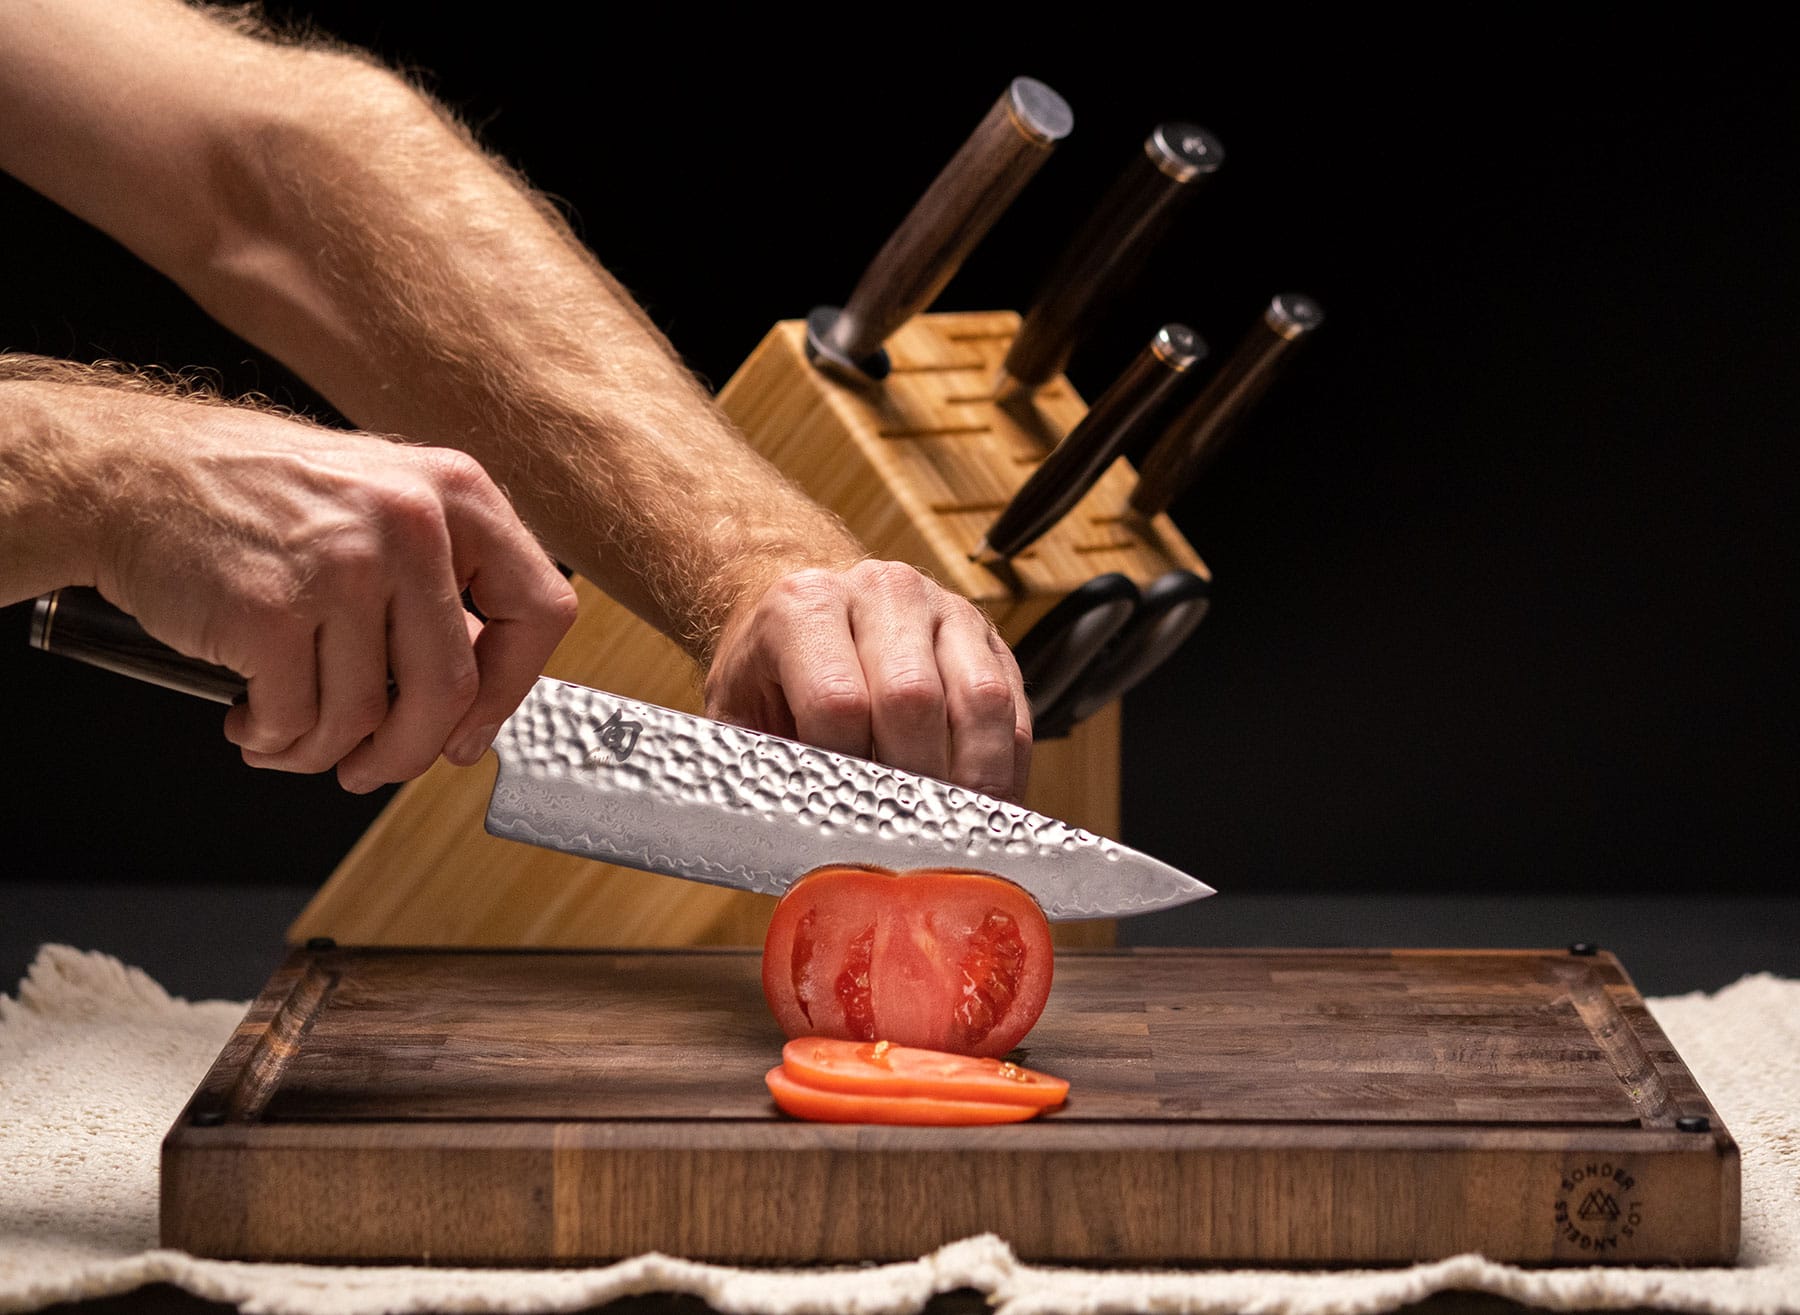 Slicing a tomato with the Miyabi Mizu chef knife in front of the set and storage block.